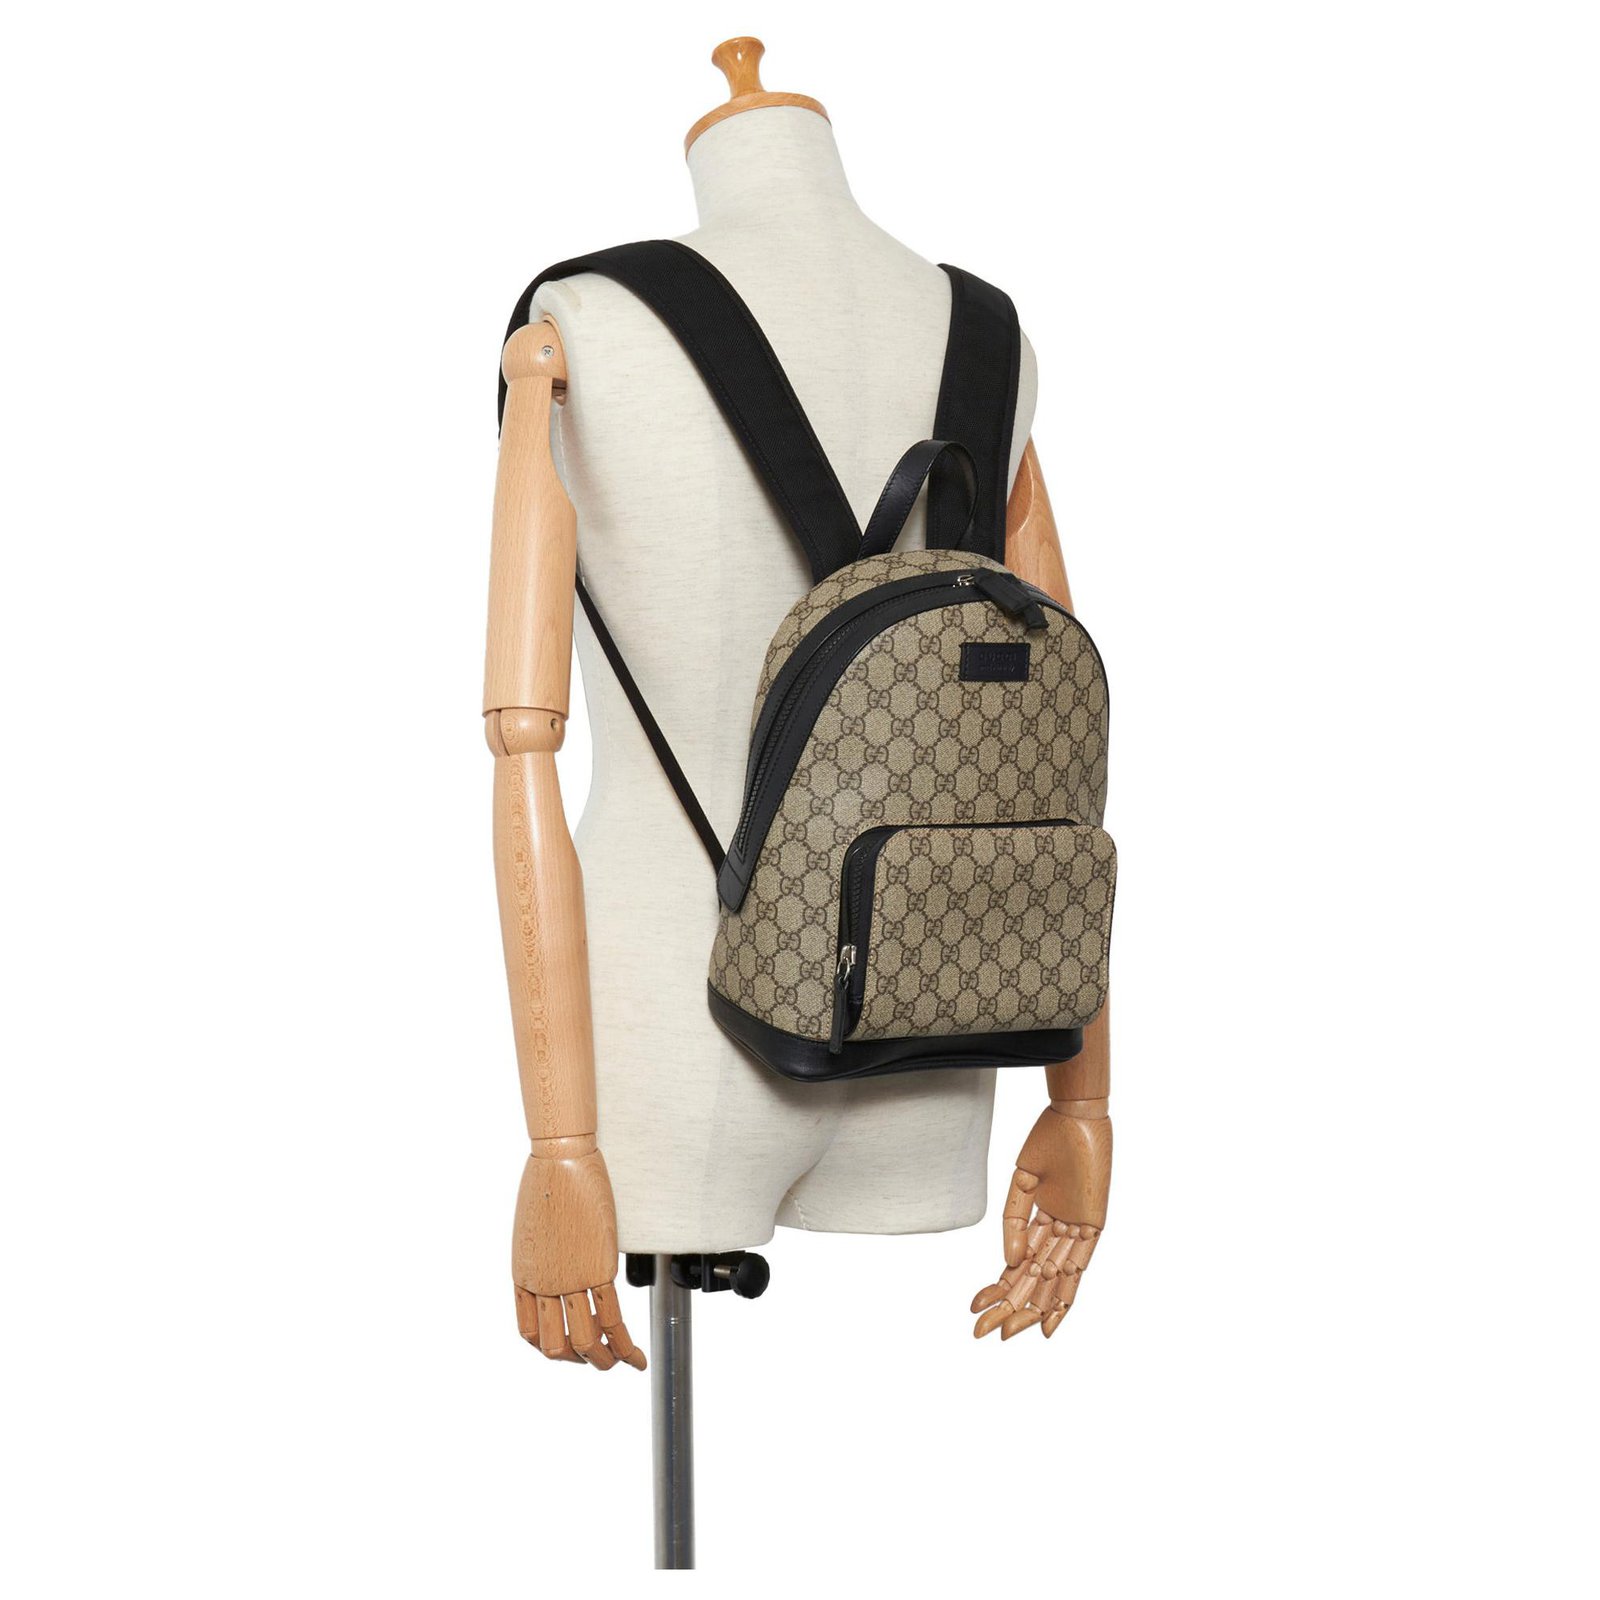 Gucci GUCCI Backpack GG Supreme PVC/Leather Beige x Brown Black Gold Unisex  498194